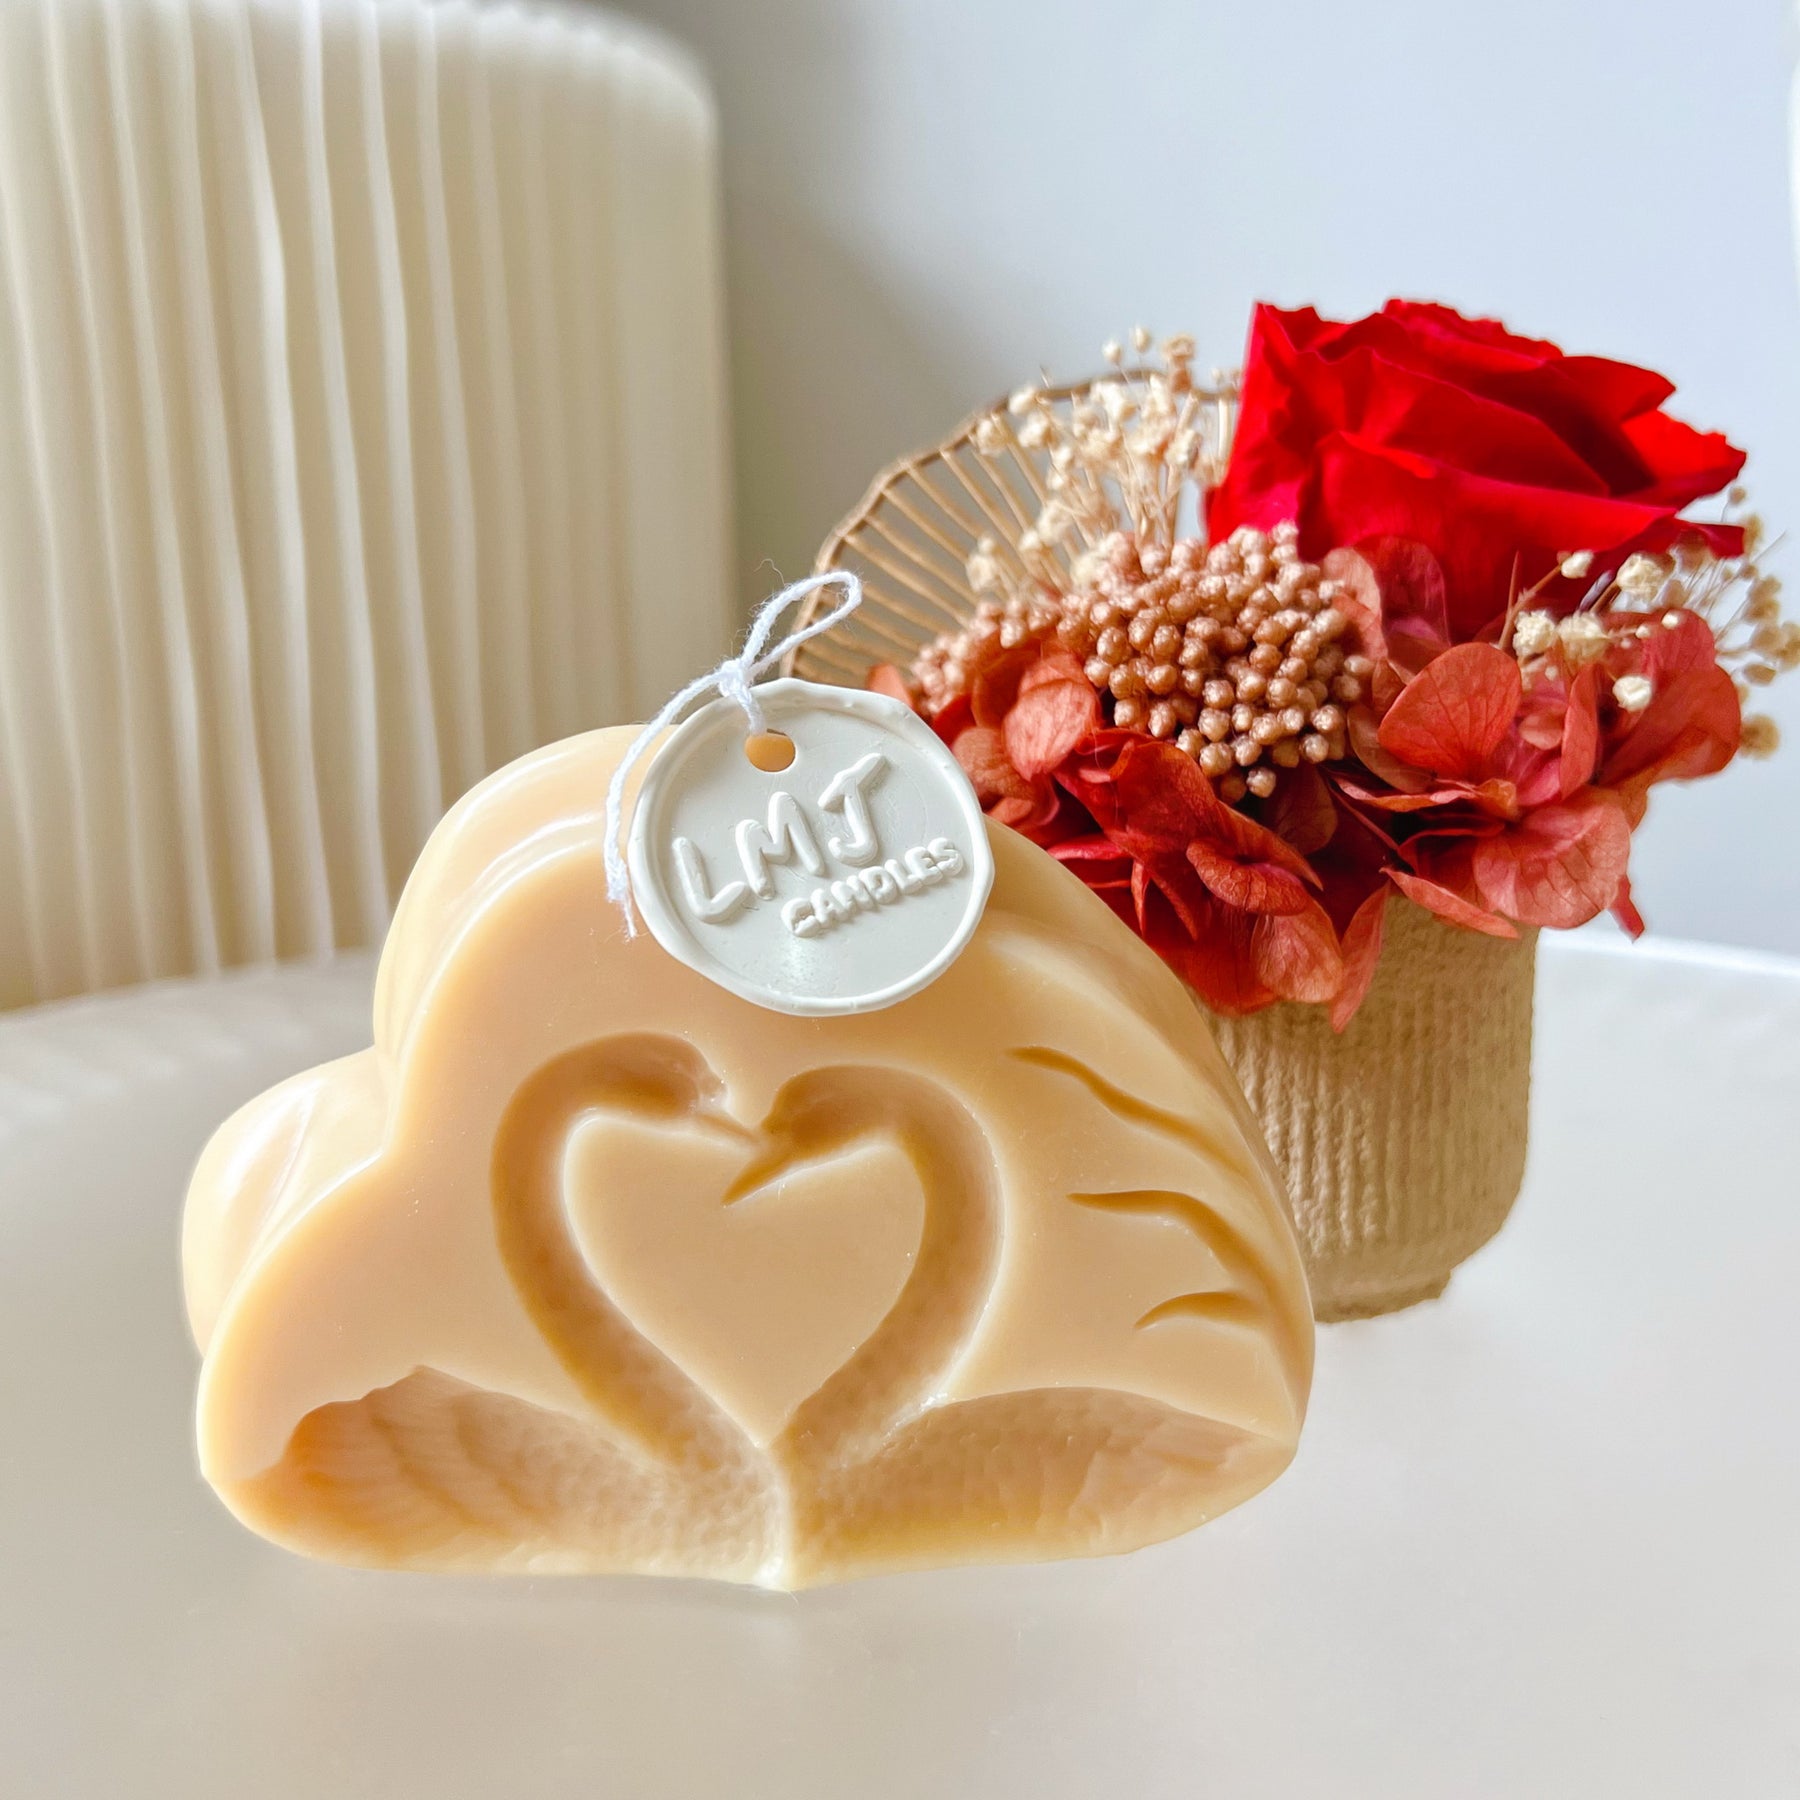 Swan Scented Soy Candle - Valentine's Day Gift | LMJ Candles